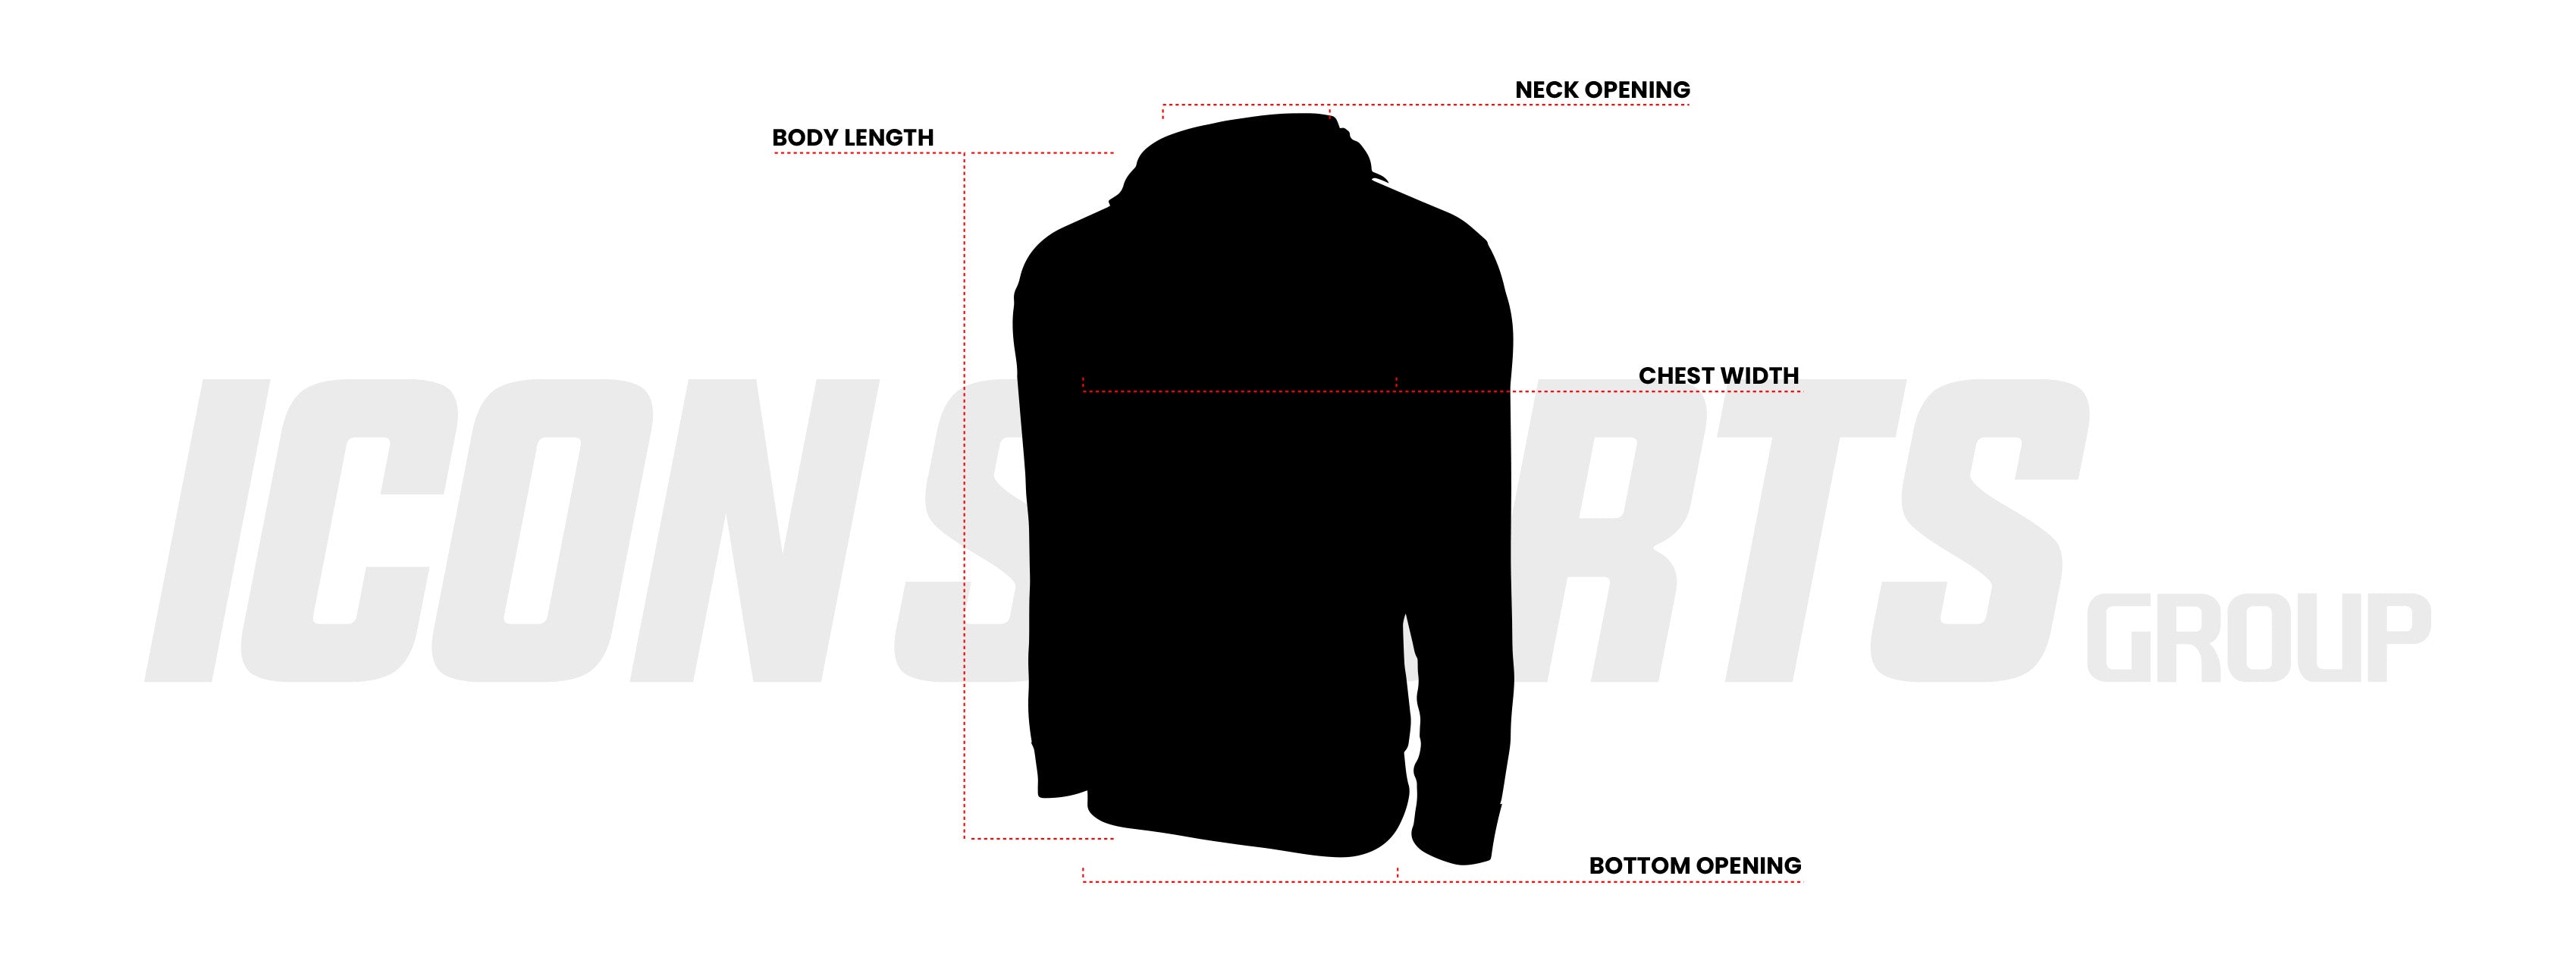 Youth Hodie Size Chart